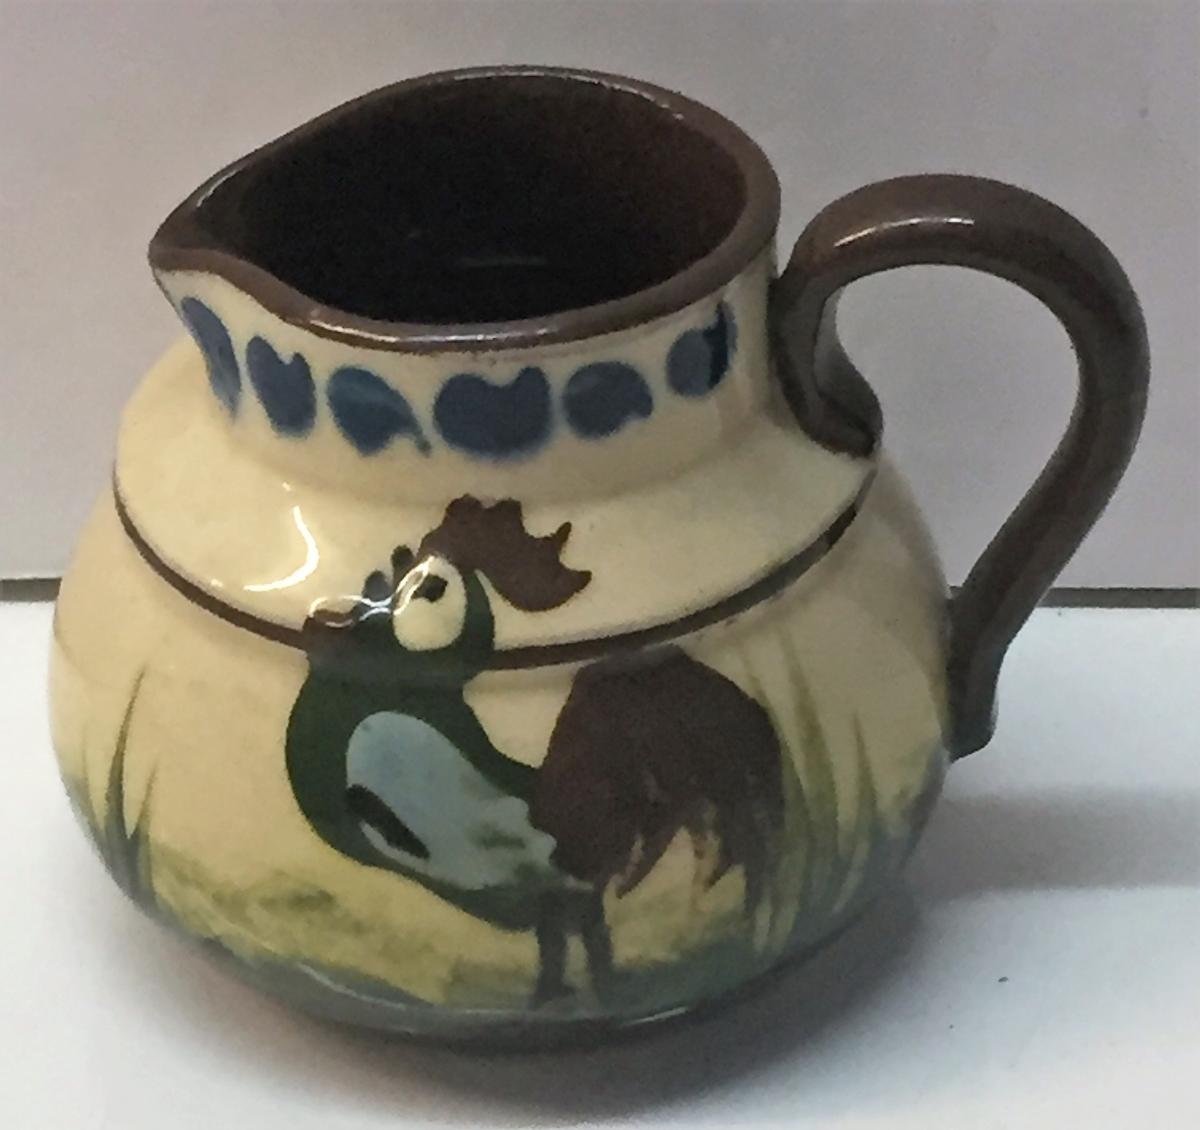 Vintage Washington DC Clay Pottery Pitcher with Rooster